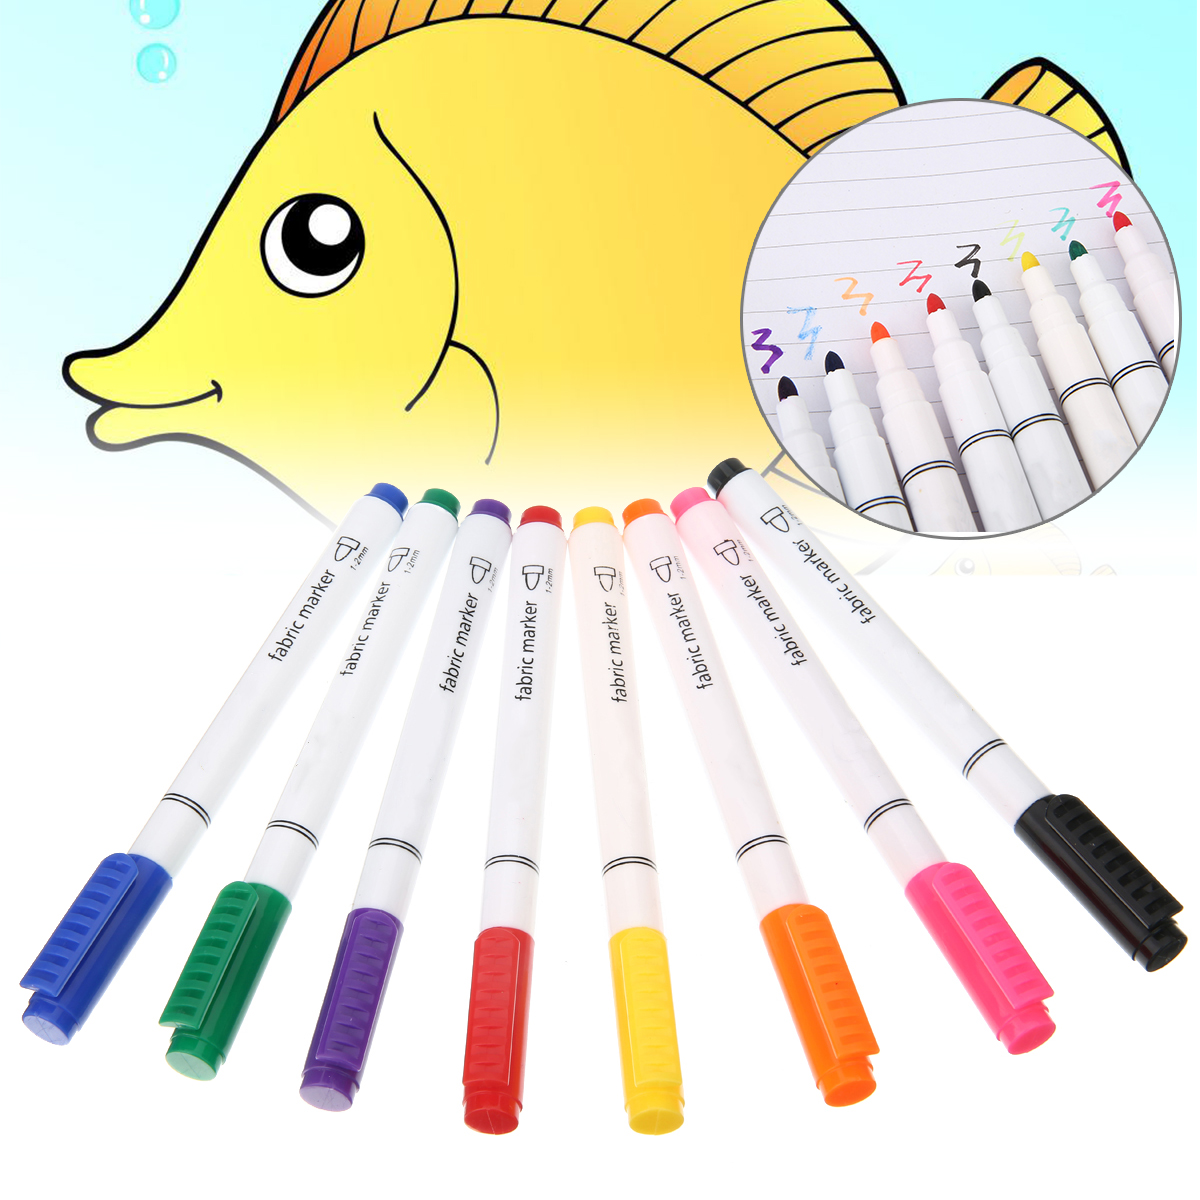 8 Piece Multicolor Clothes Textile Markers Fabric Pens Arts Crafts DIY T-shirt Painting Pen For Student Child Writing Supplies